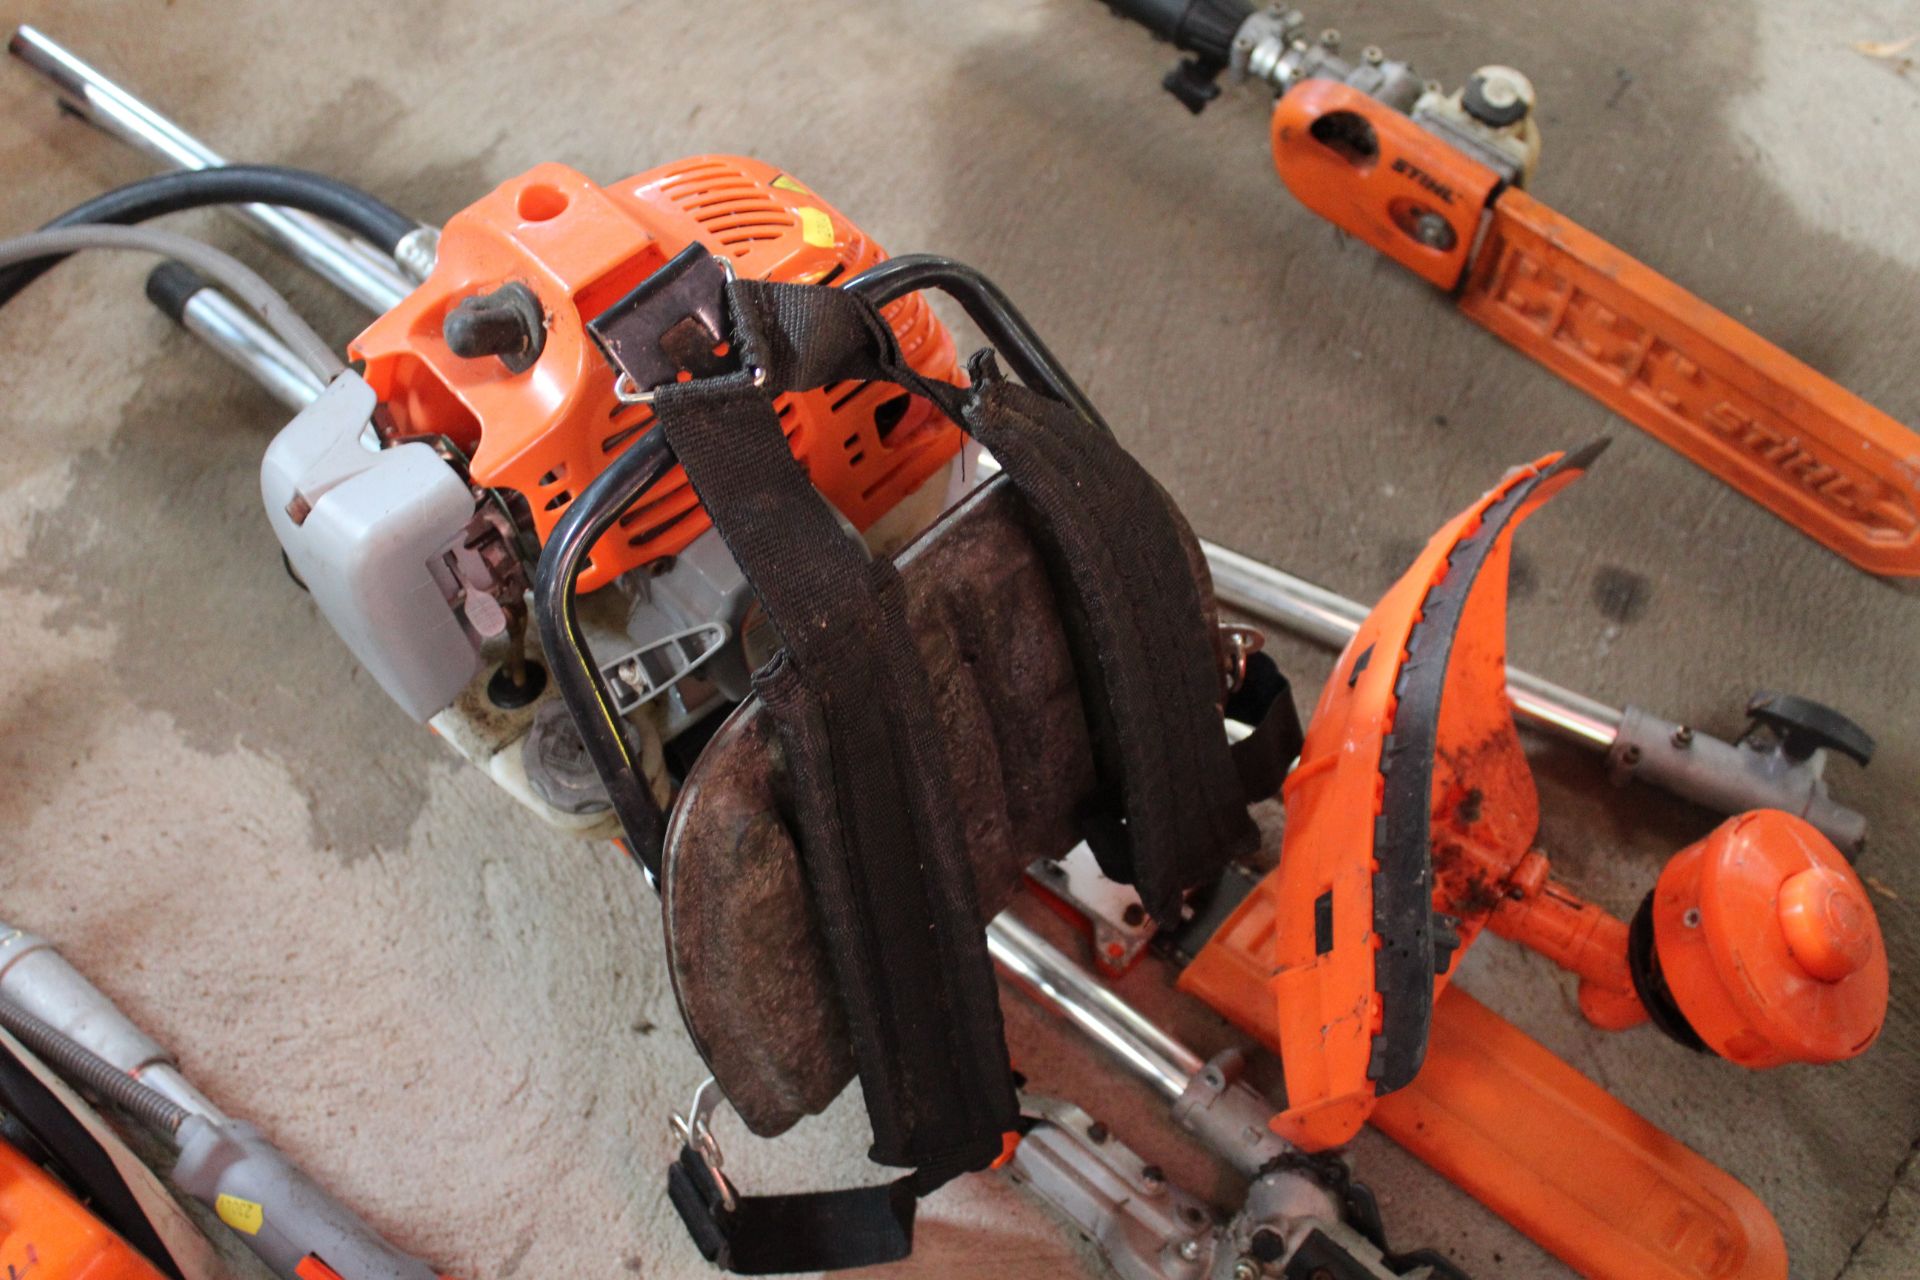 Backpack mounted multi tool unit with pole saw, hedge cutter, pruning saw etc - Image 2 of 6